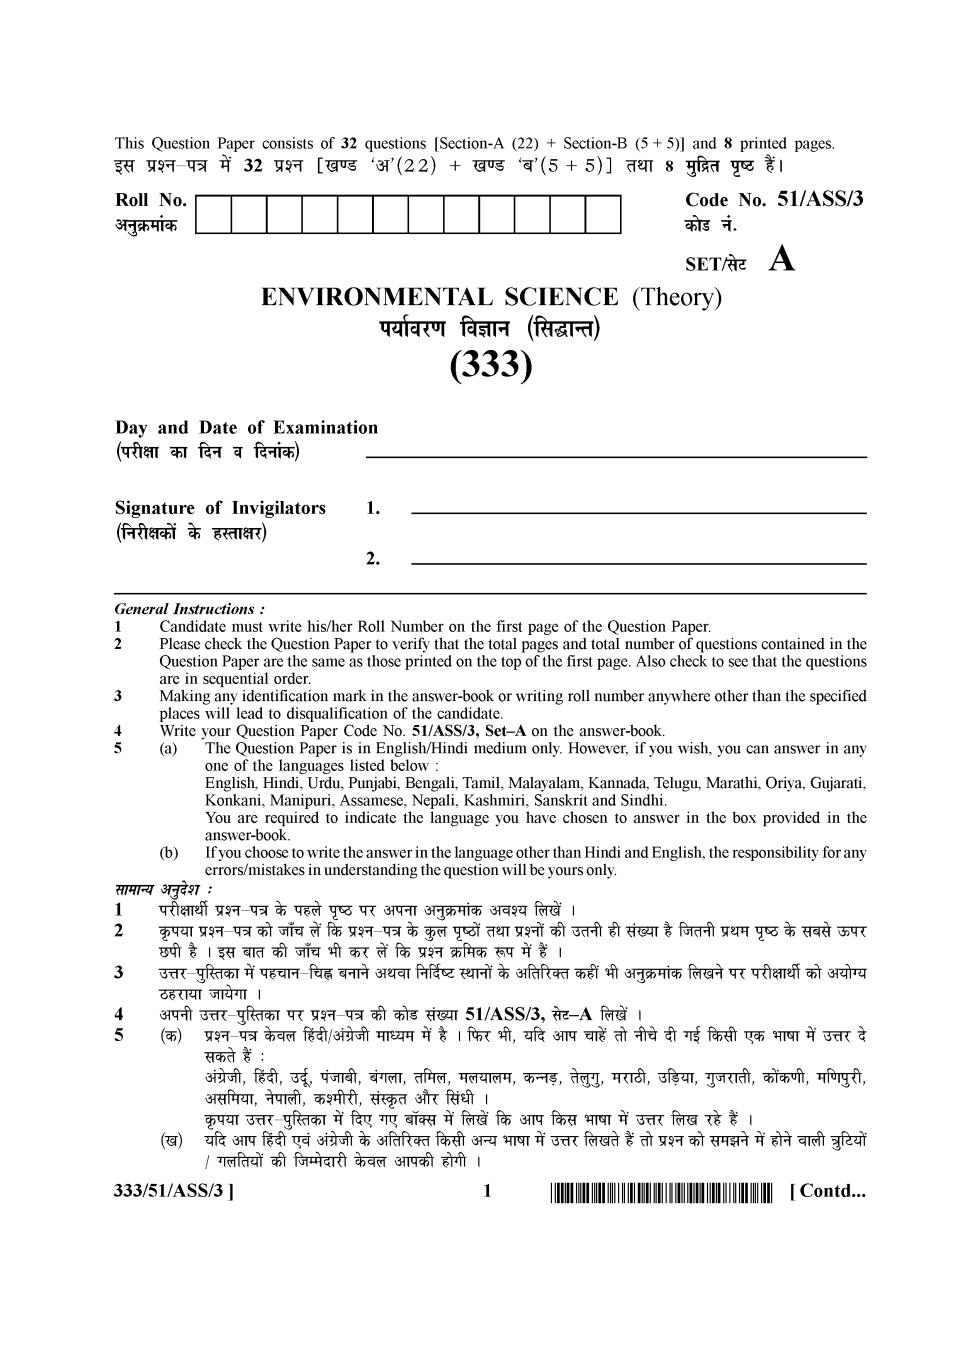 NIOS Class 12 Question Paper Oct 2015 - Environmental Science Theory - Page 1